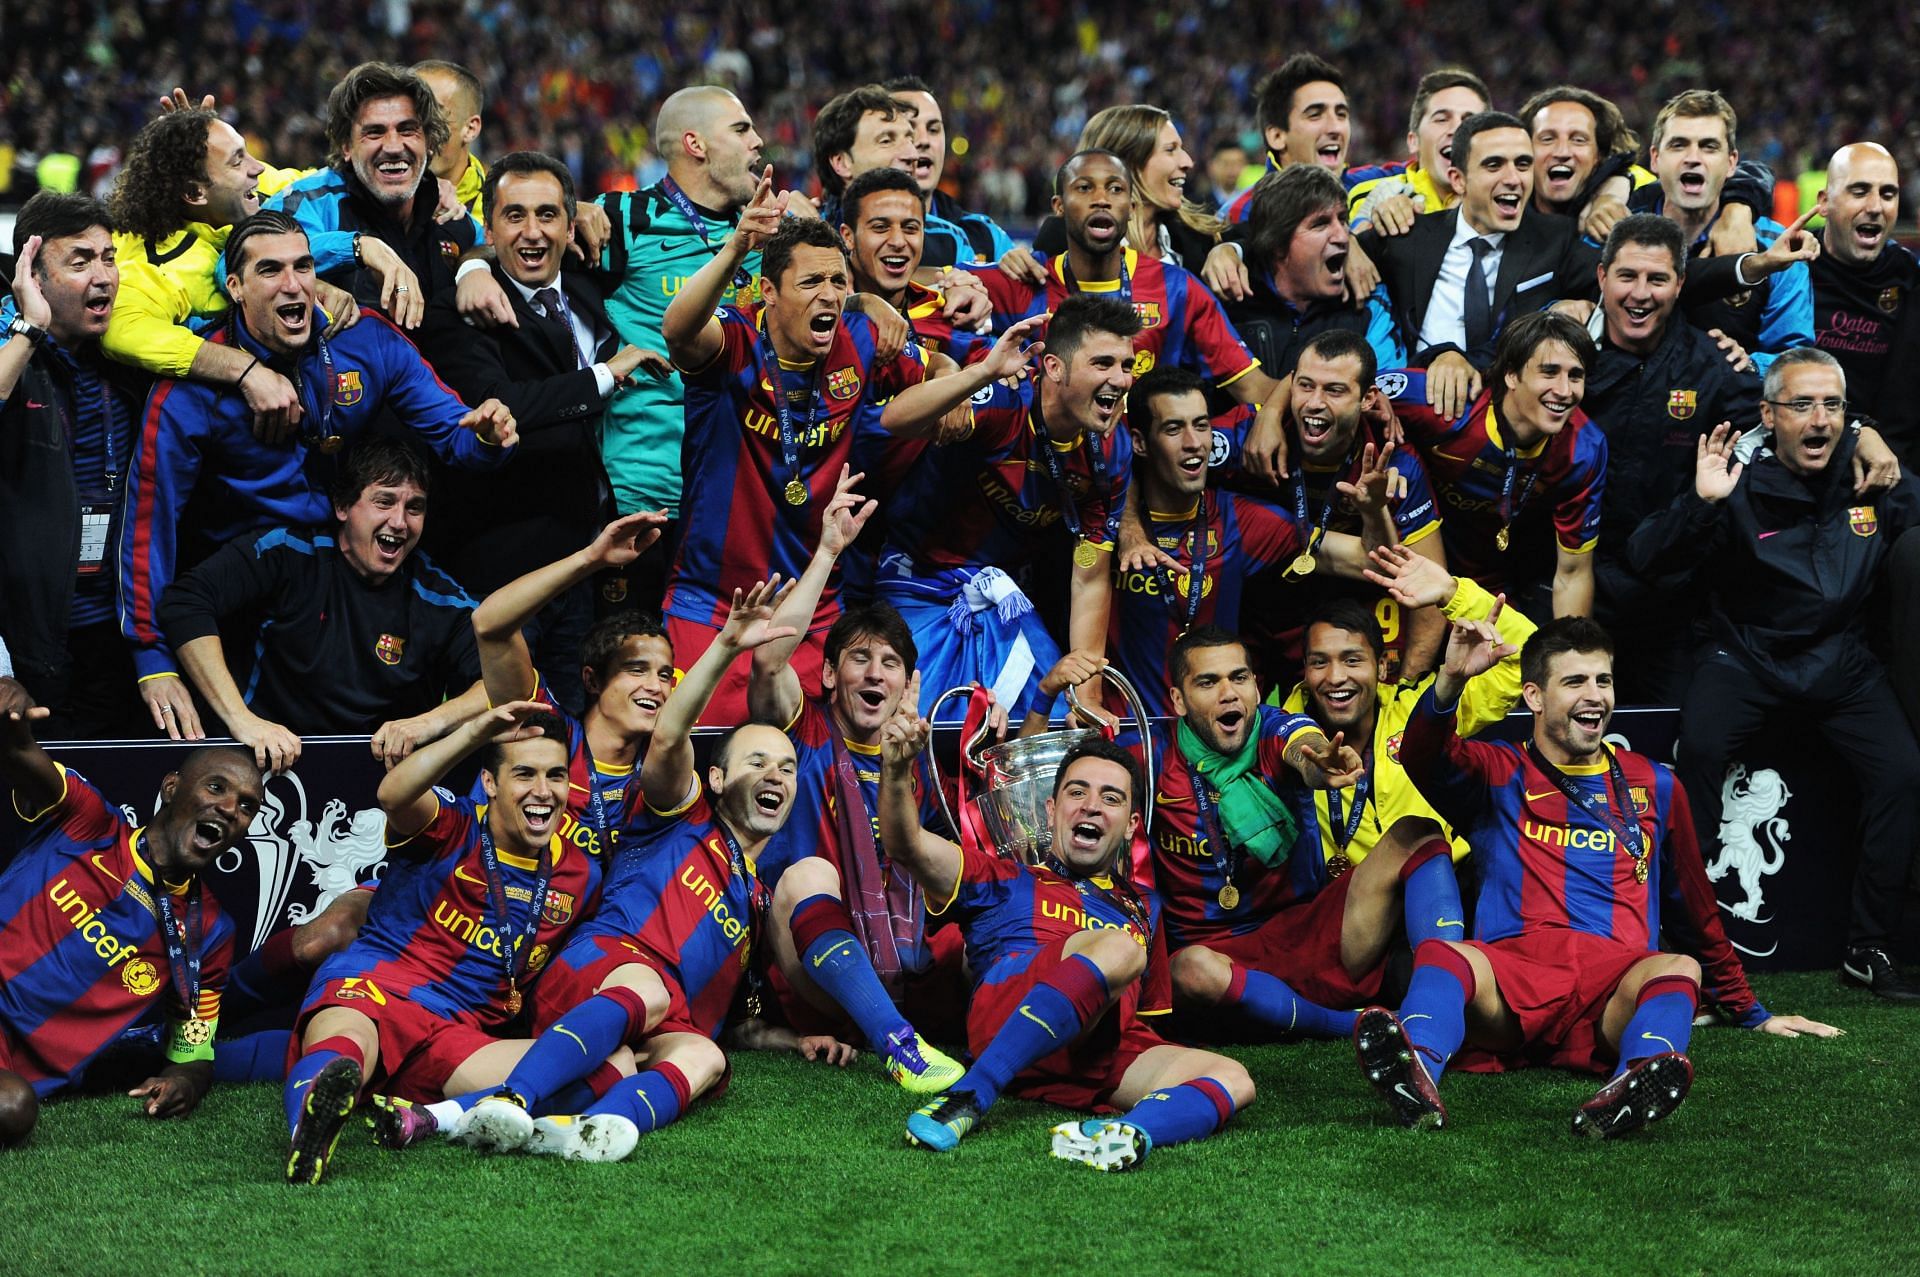 Barcelona had one of the best teams of all-time during the Pep Guardiola, winning two Champions League titles in three seasons.